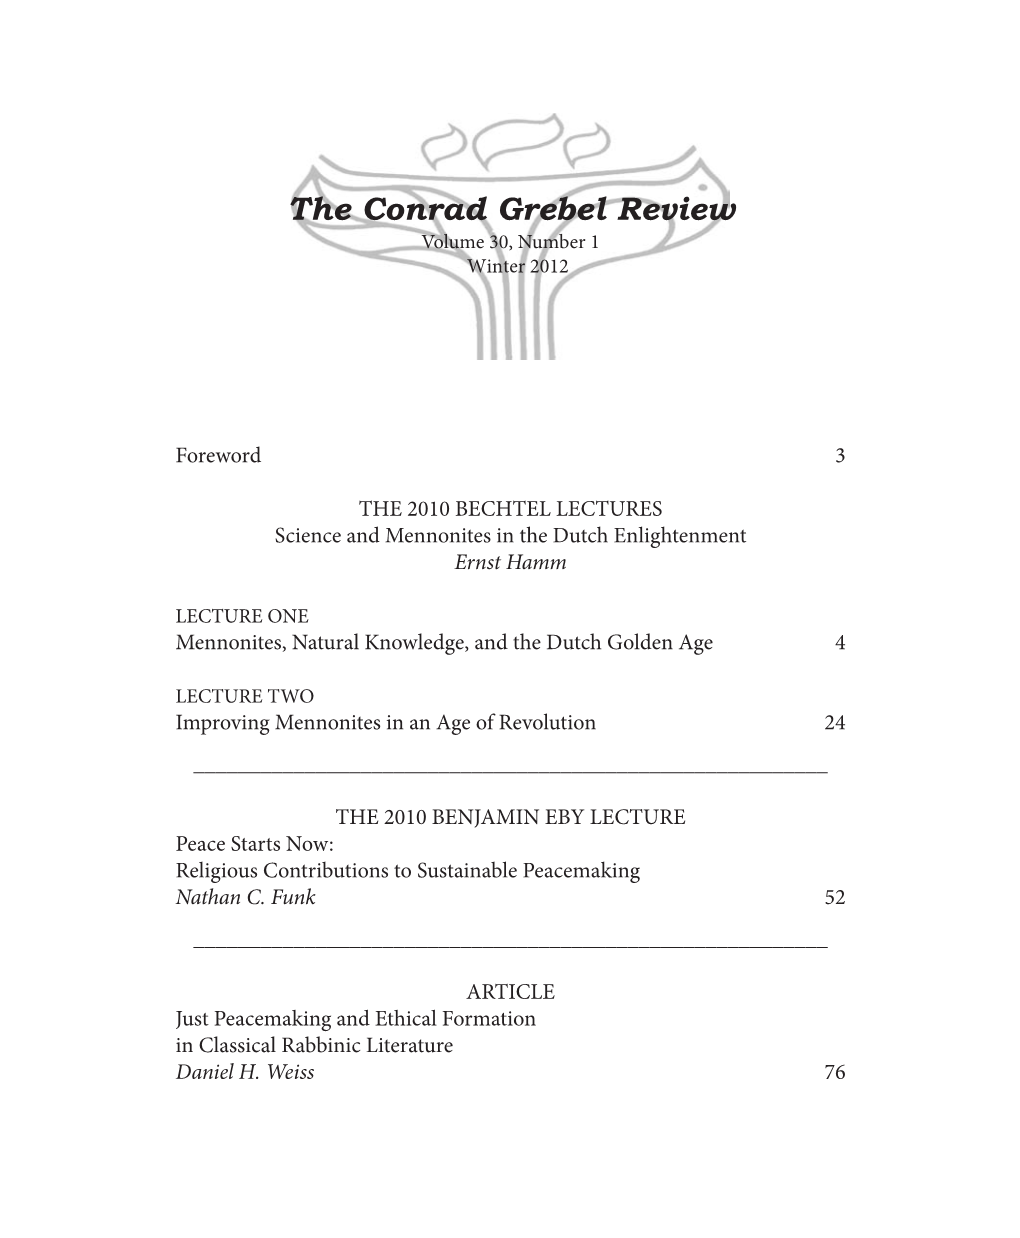 The Conrad Grebel Review Volume 30, Number 1 Winter 2012